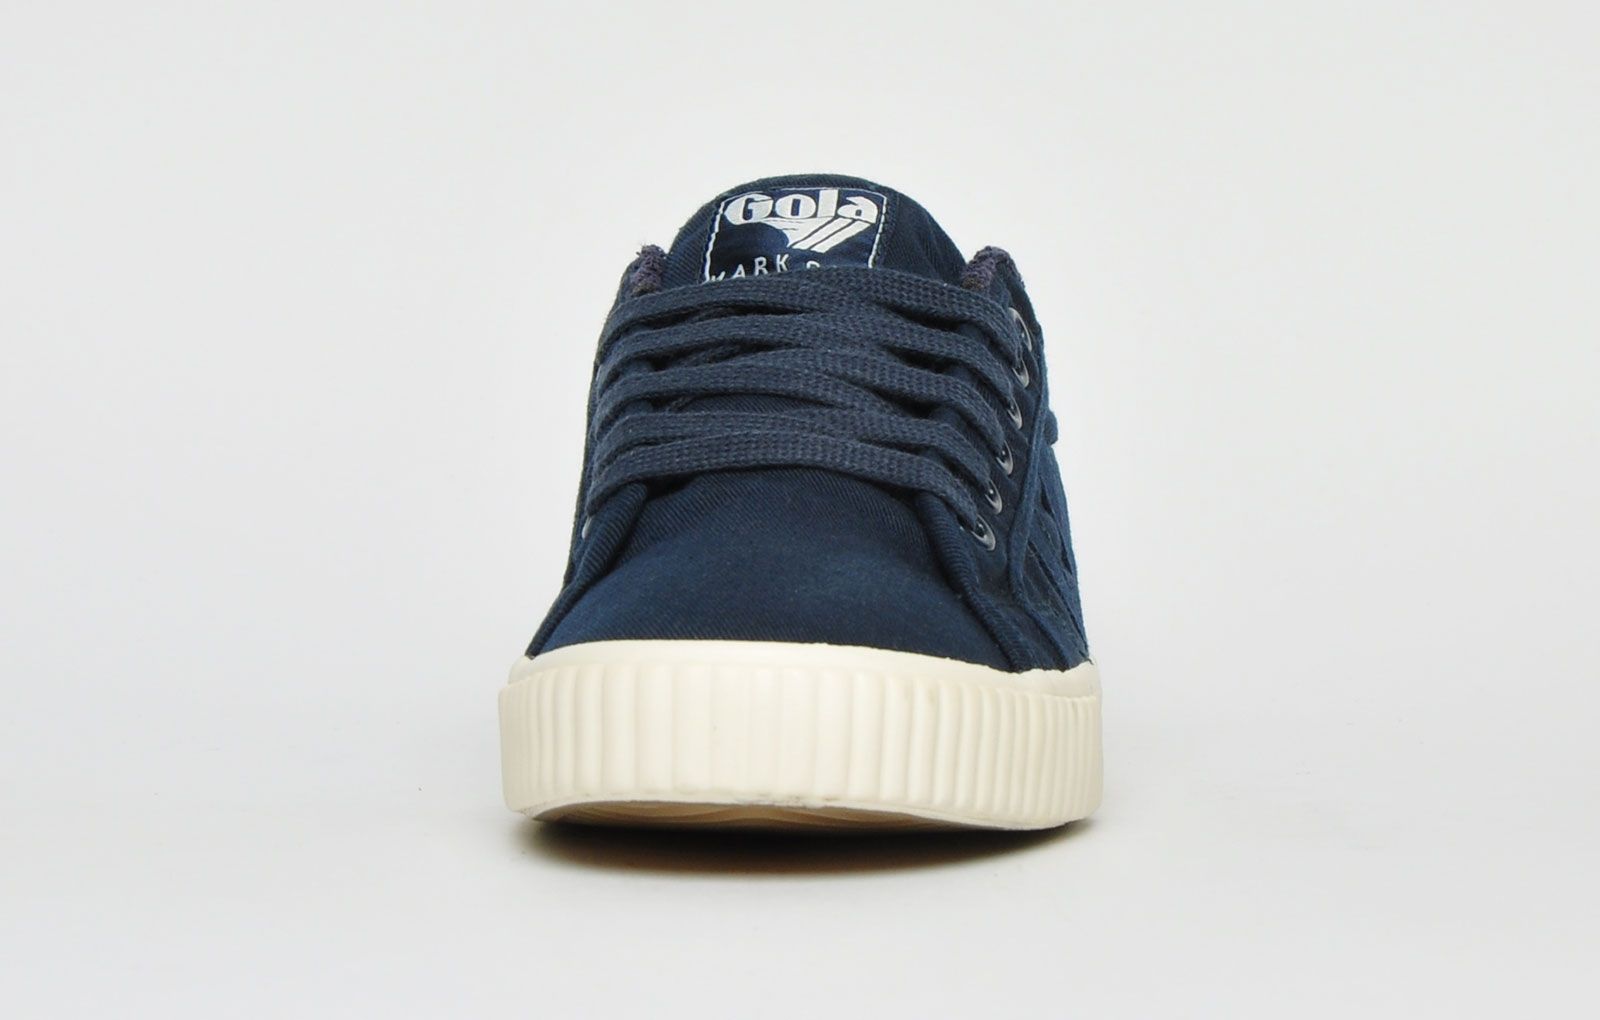 The Gola Classics Tennis Mark Cox Wash is a vegan friendly update of the original Gola Tennis shoe design from 1973. Featuring a canvas textile upper with contrasting Gola branding and a sleek vintage styled sole to give a clean and fresh look. Offering enhanced comfort with a padded soft brushed lining and padded insole, its versatile style can be teamed with a variety of looks to add a relaxed touch to any outfit. <p>- Retro style</p> <p>- Vegan Friendly</p> <p>- Soft lining for additional comfort</p> <p> - Premium canvas textile upper</p> <p>- Lace-up closure</p> <p>- Gola Classics branding throughout</p>